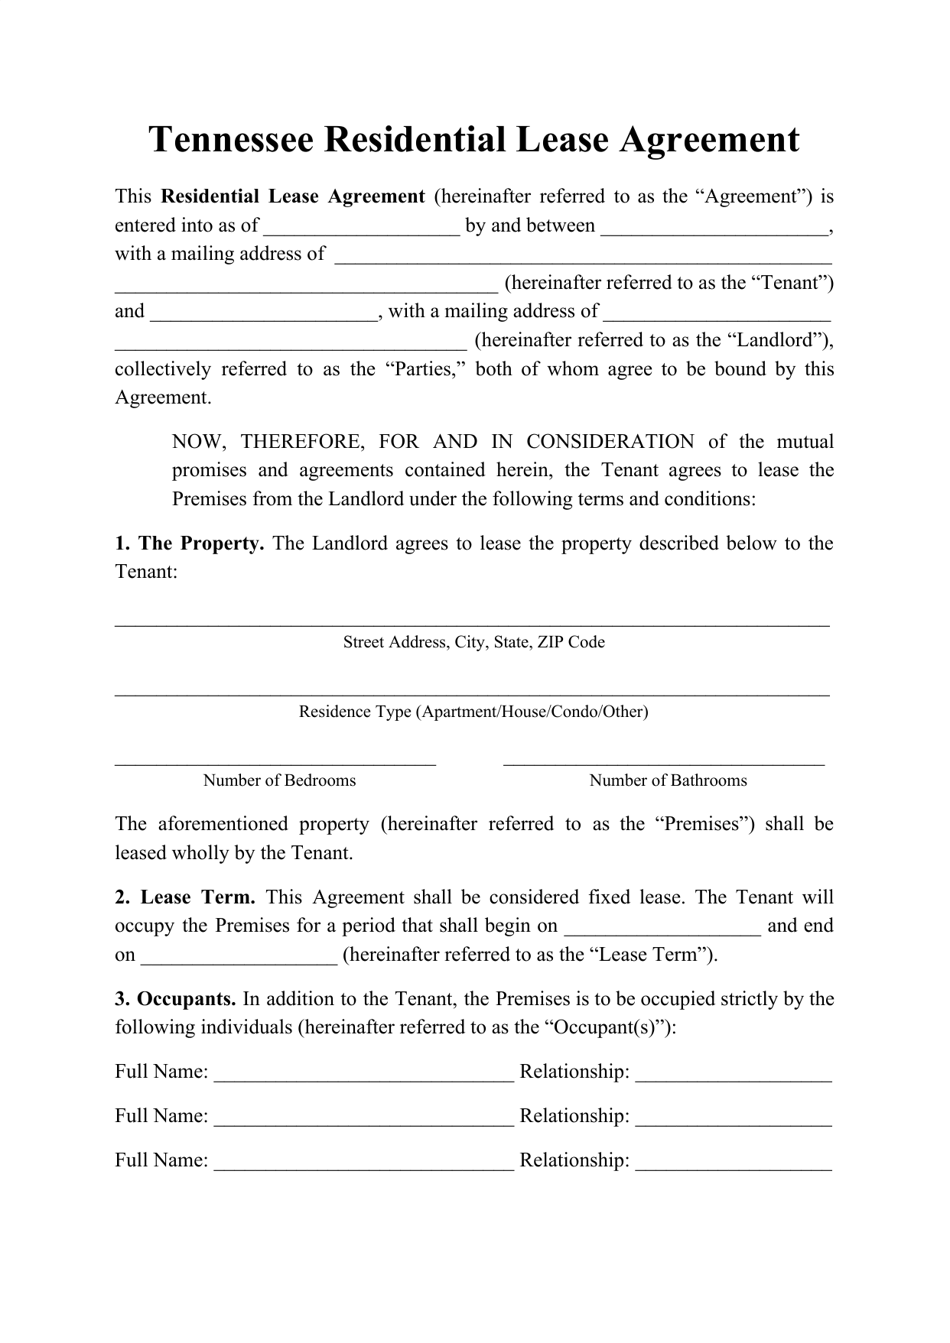 tennessee-residential-lease-agreement-template-fill-out-sign-online